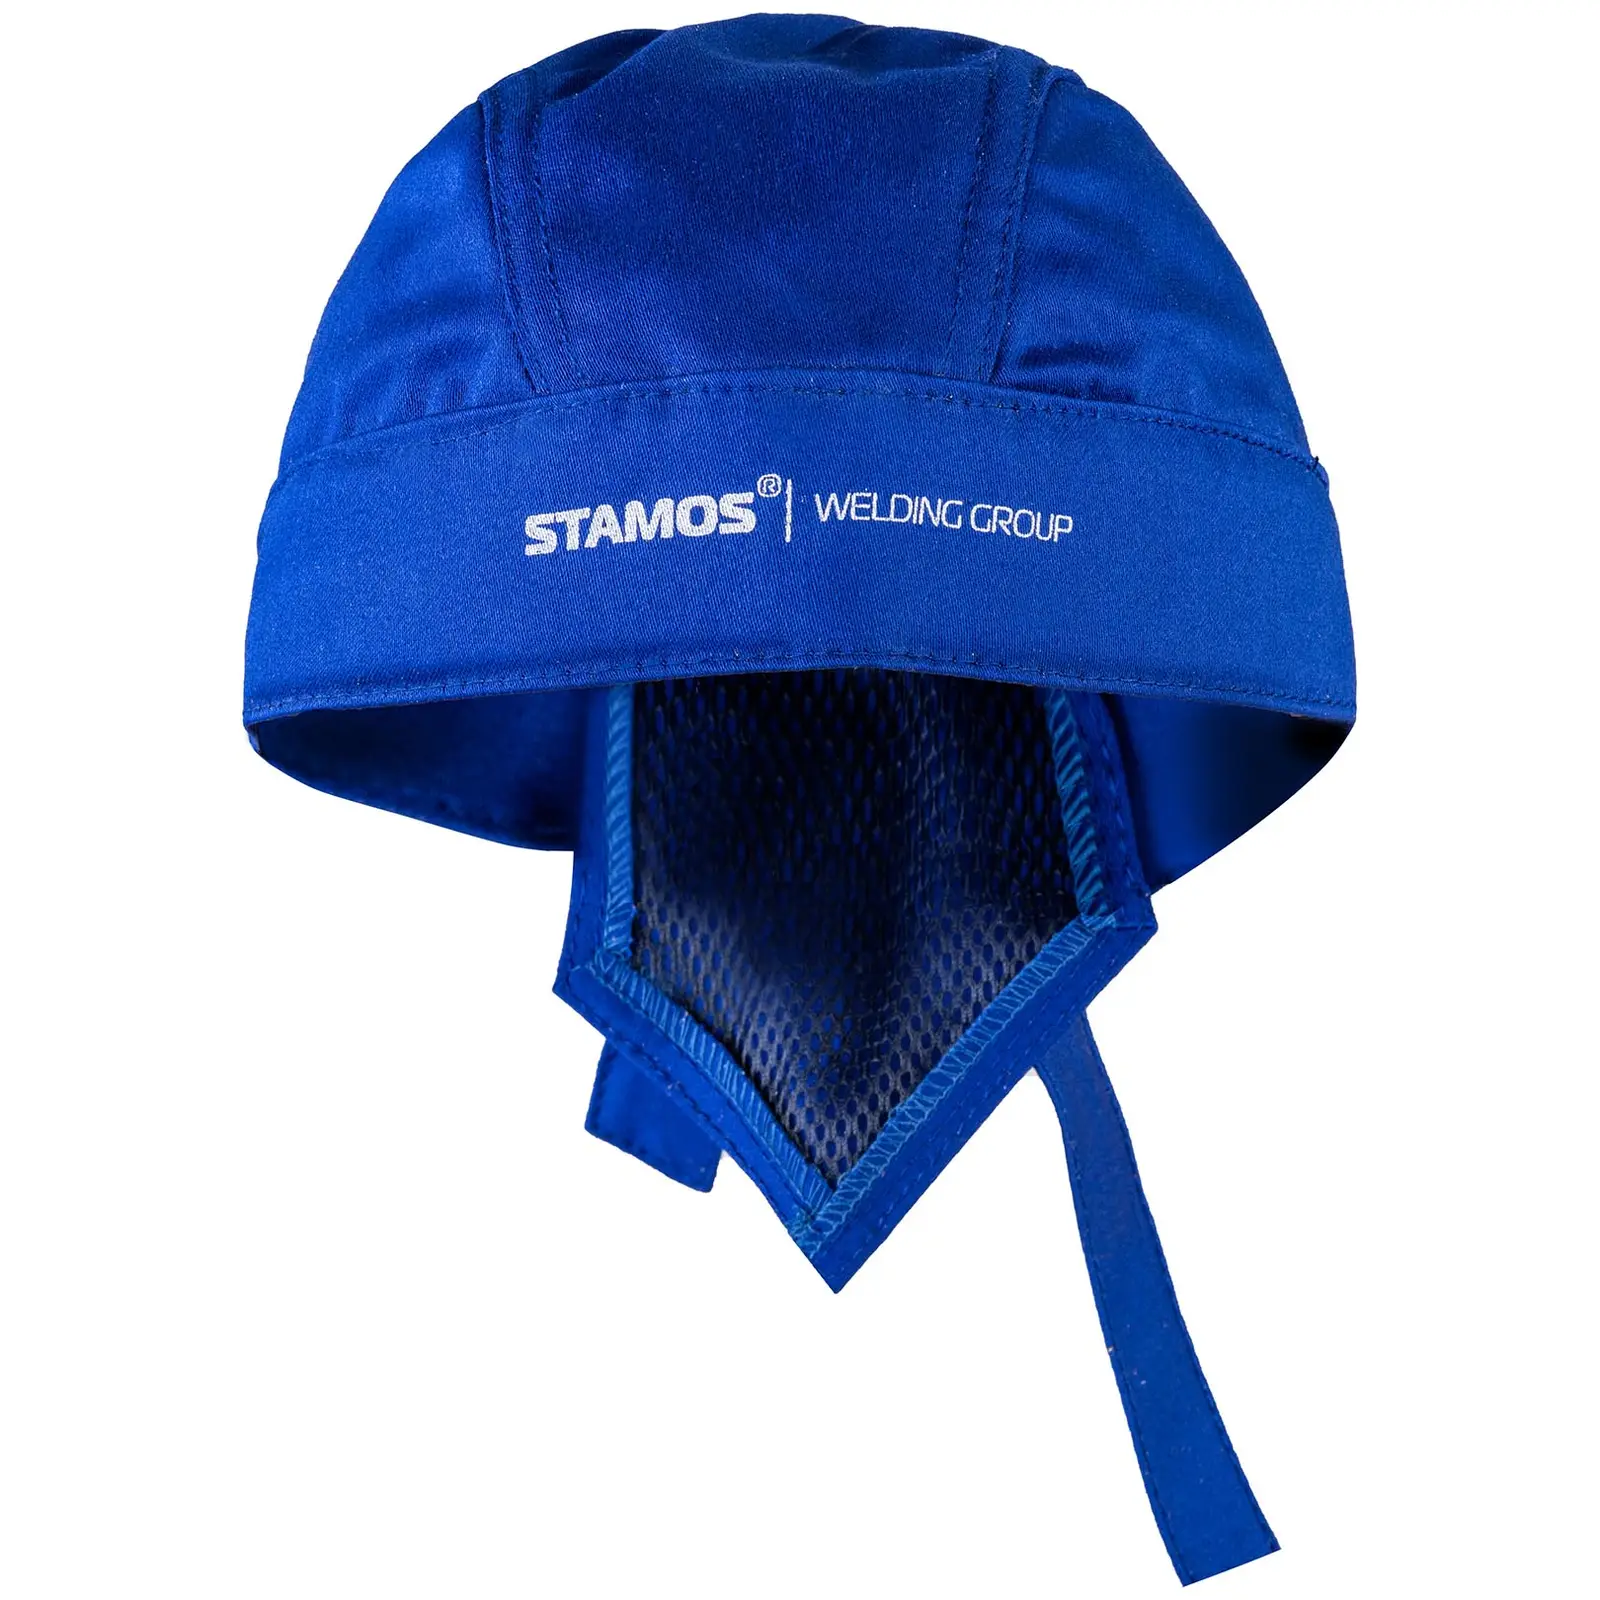 Welding Cap - 15 x 51/27 cm - variable circumference - Blue